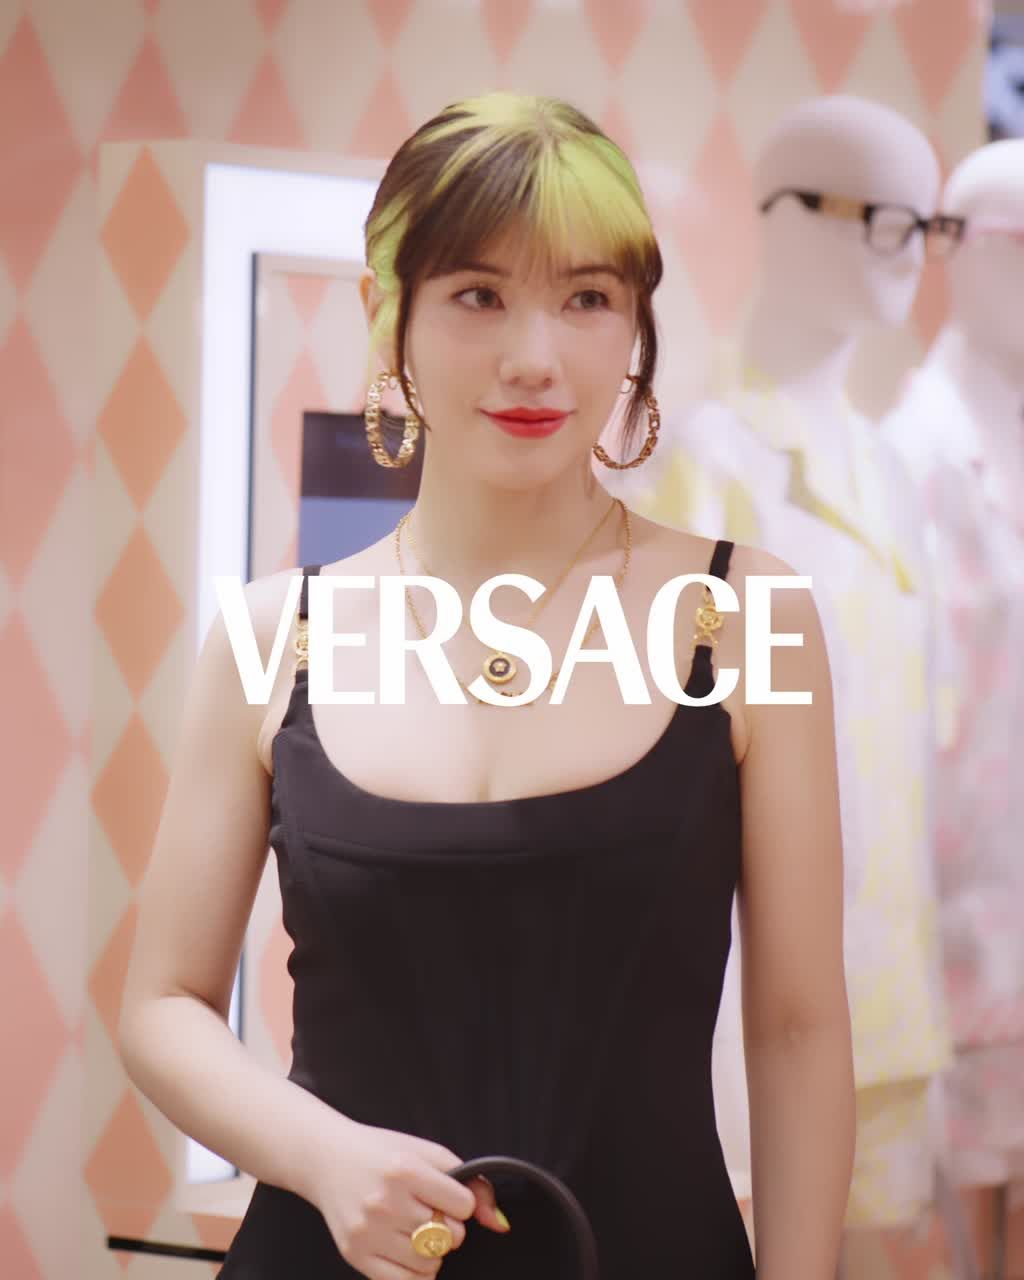 preview for versace